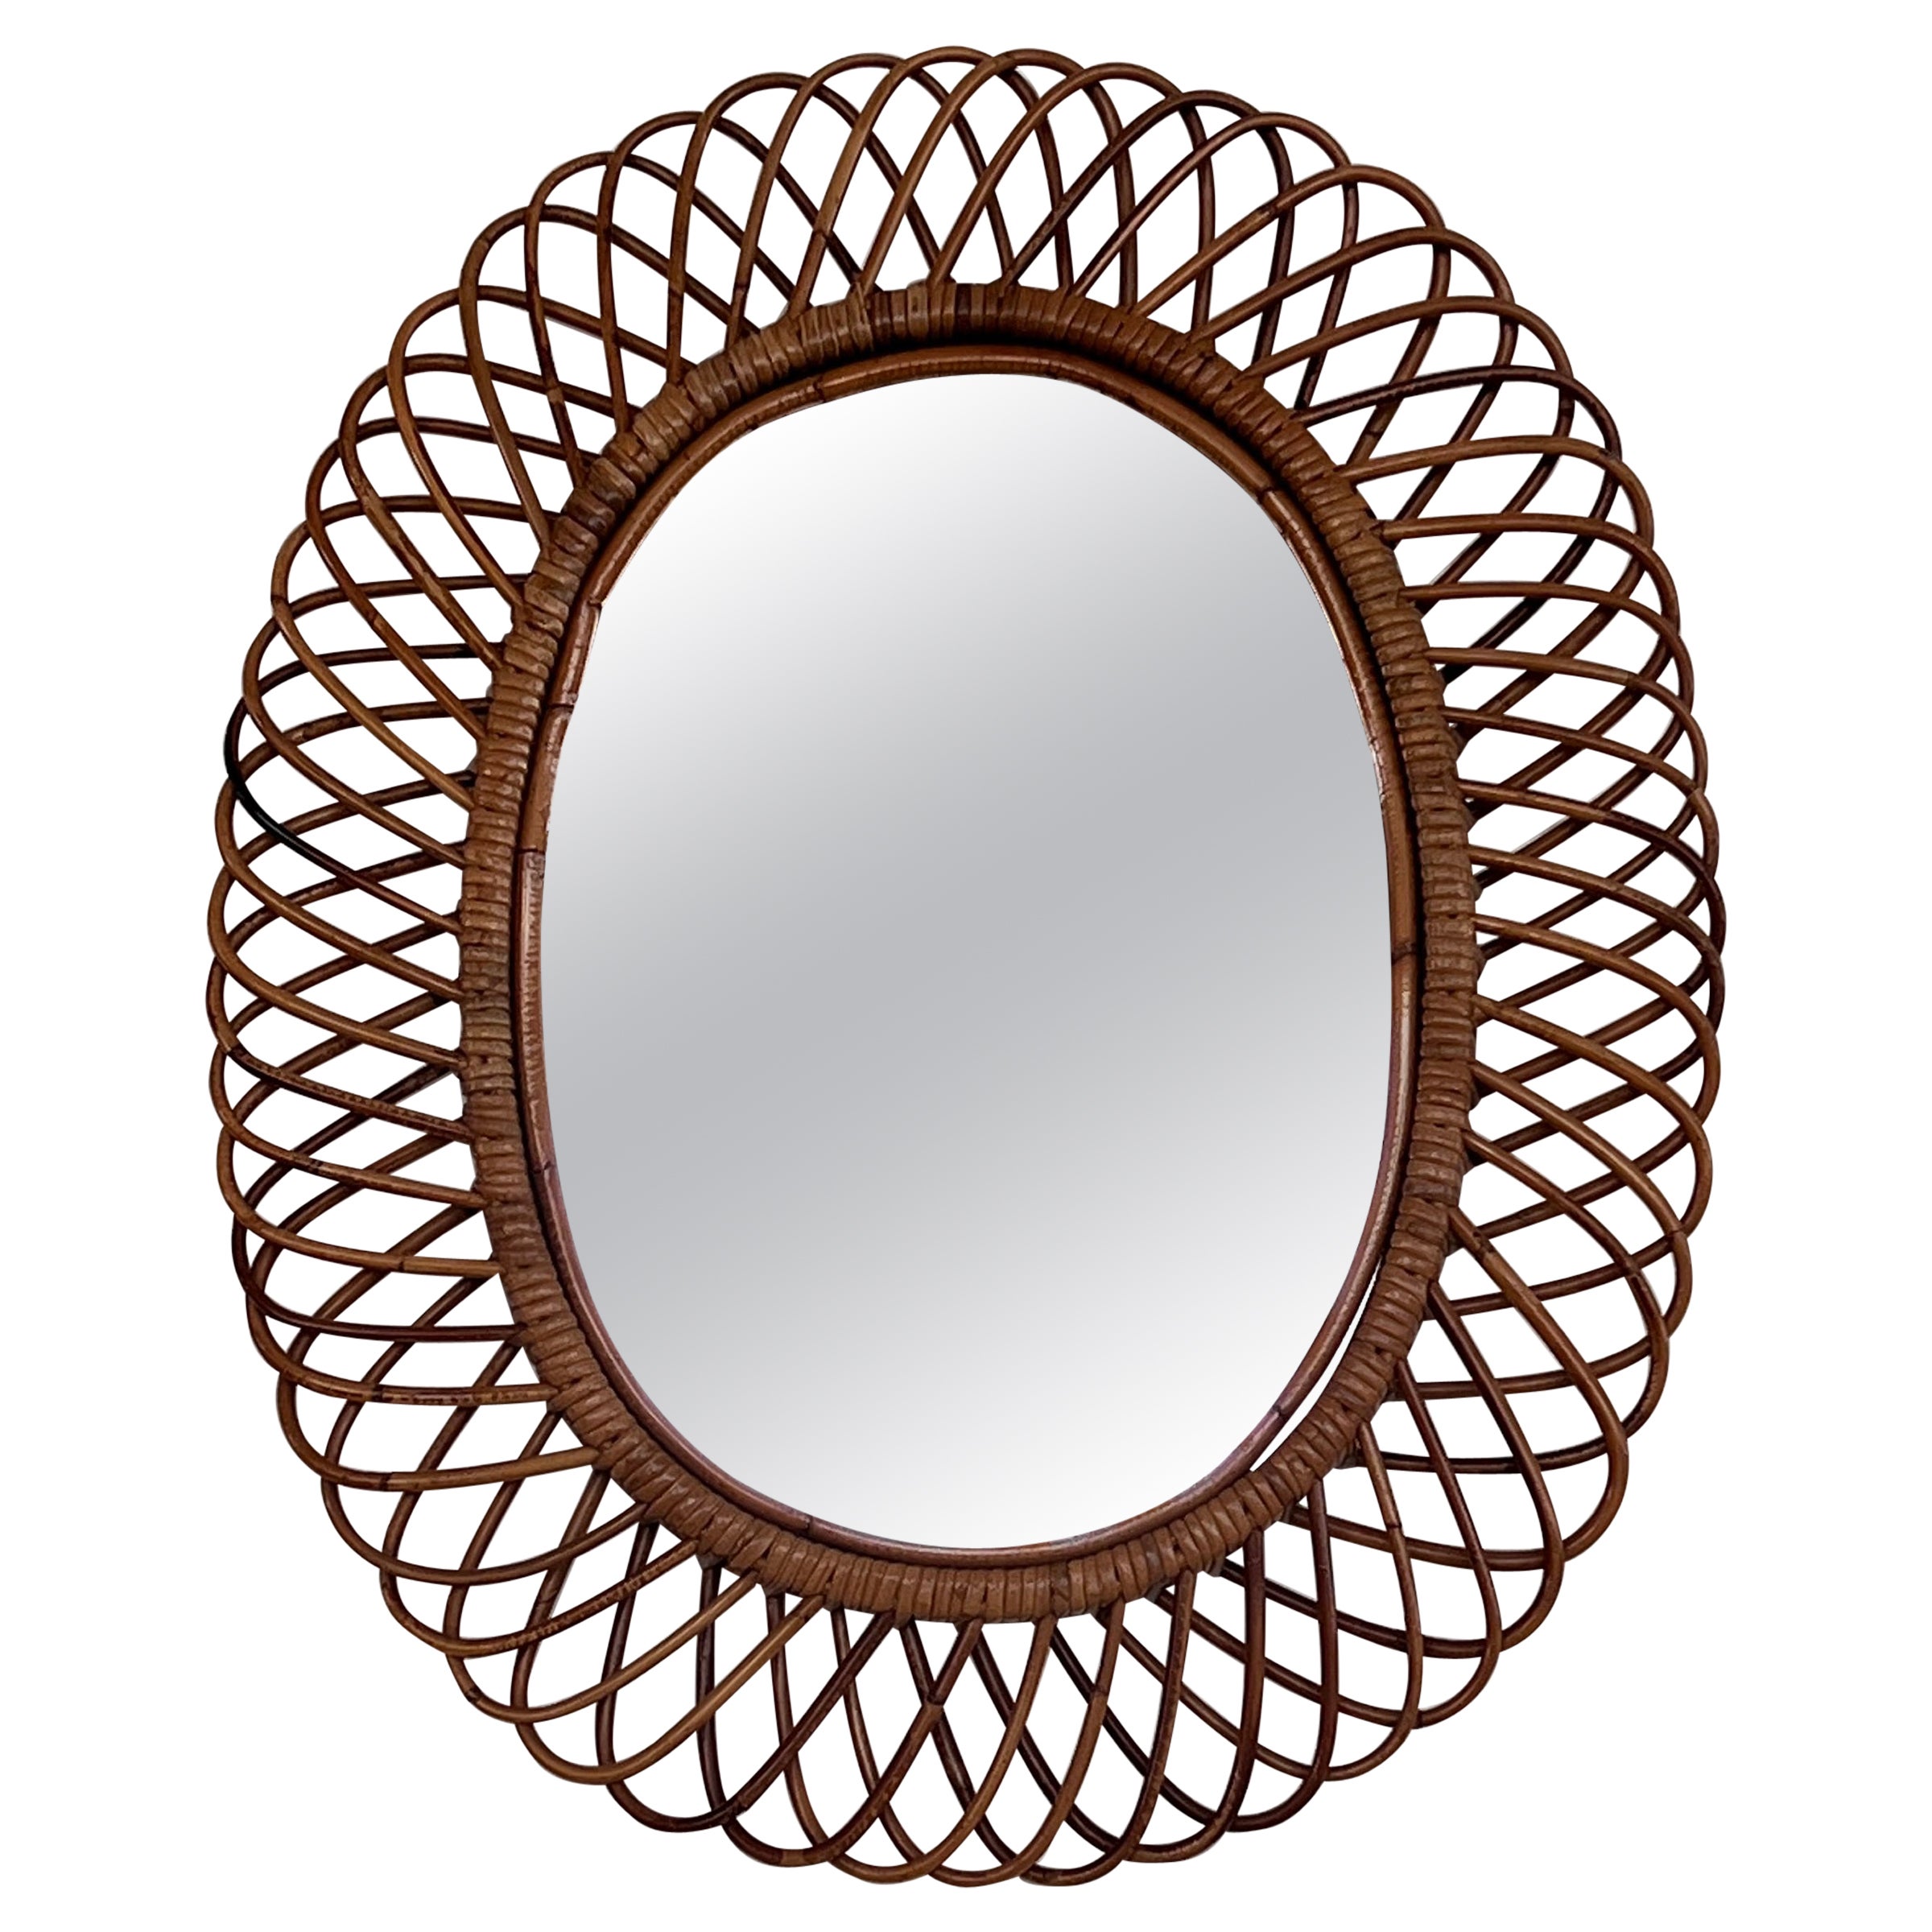 Italian Midcentury Oval Wall Mirror With Bamboo Frame Franco Albini Style, 1960s